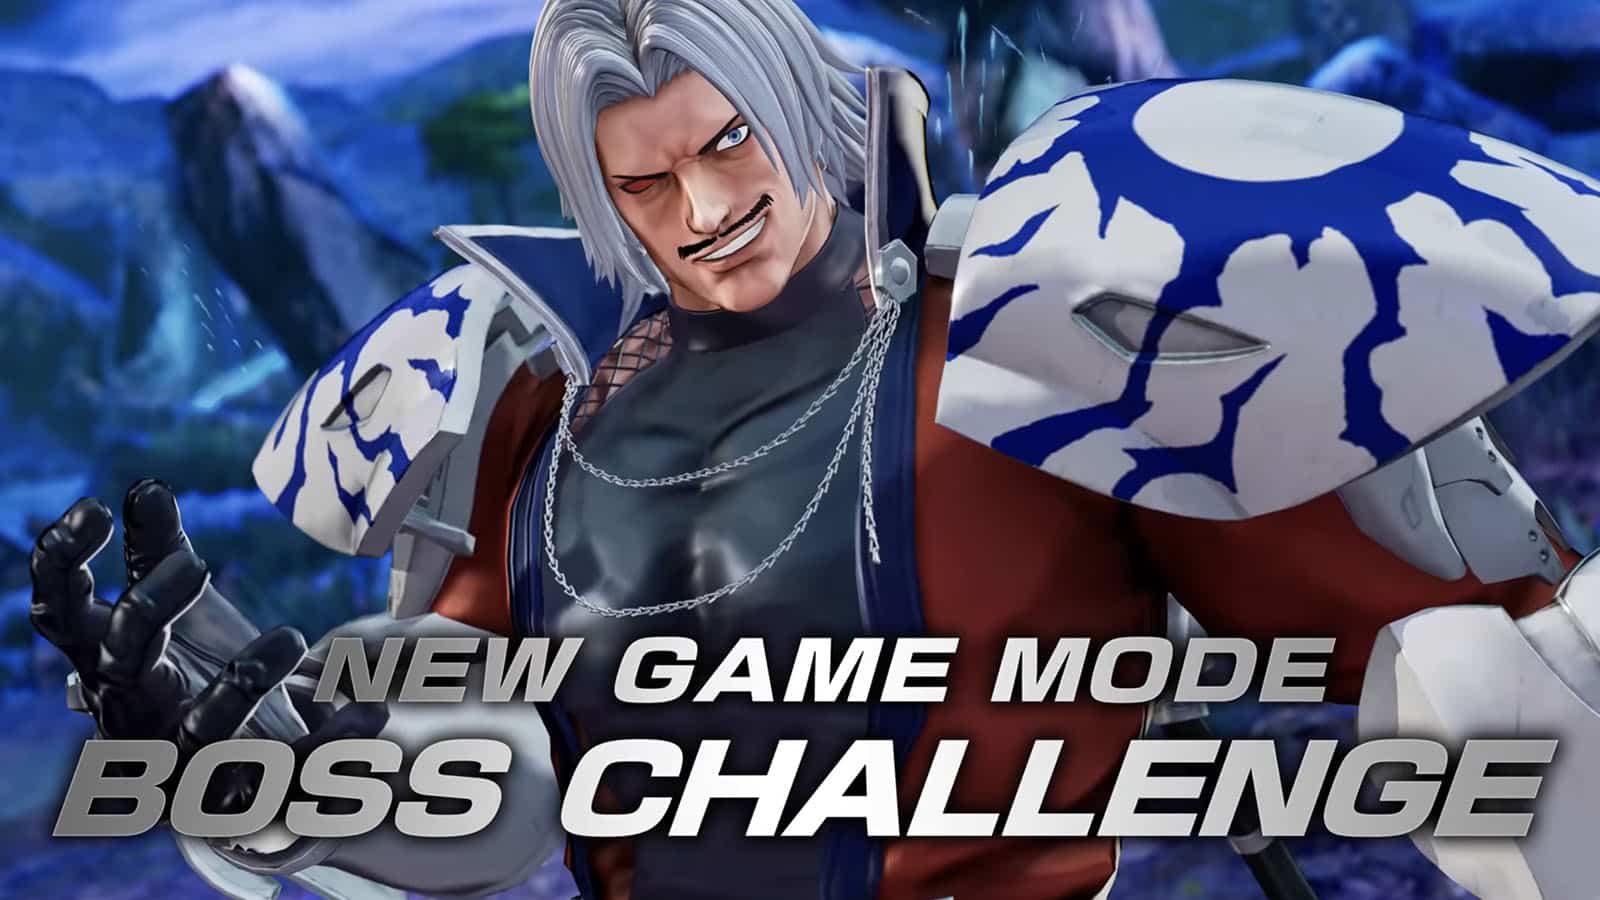 Omega Rugal in King of Fighters 15